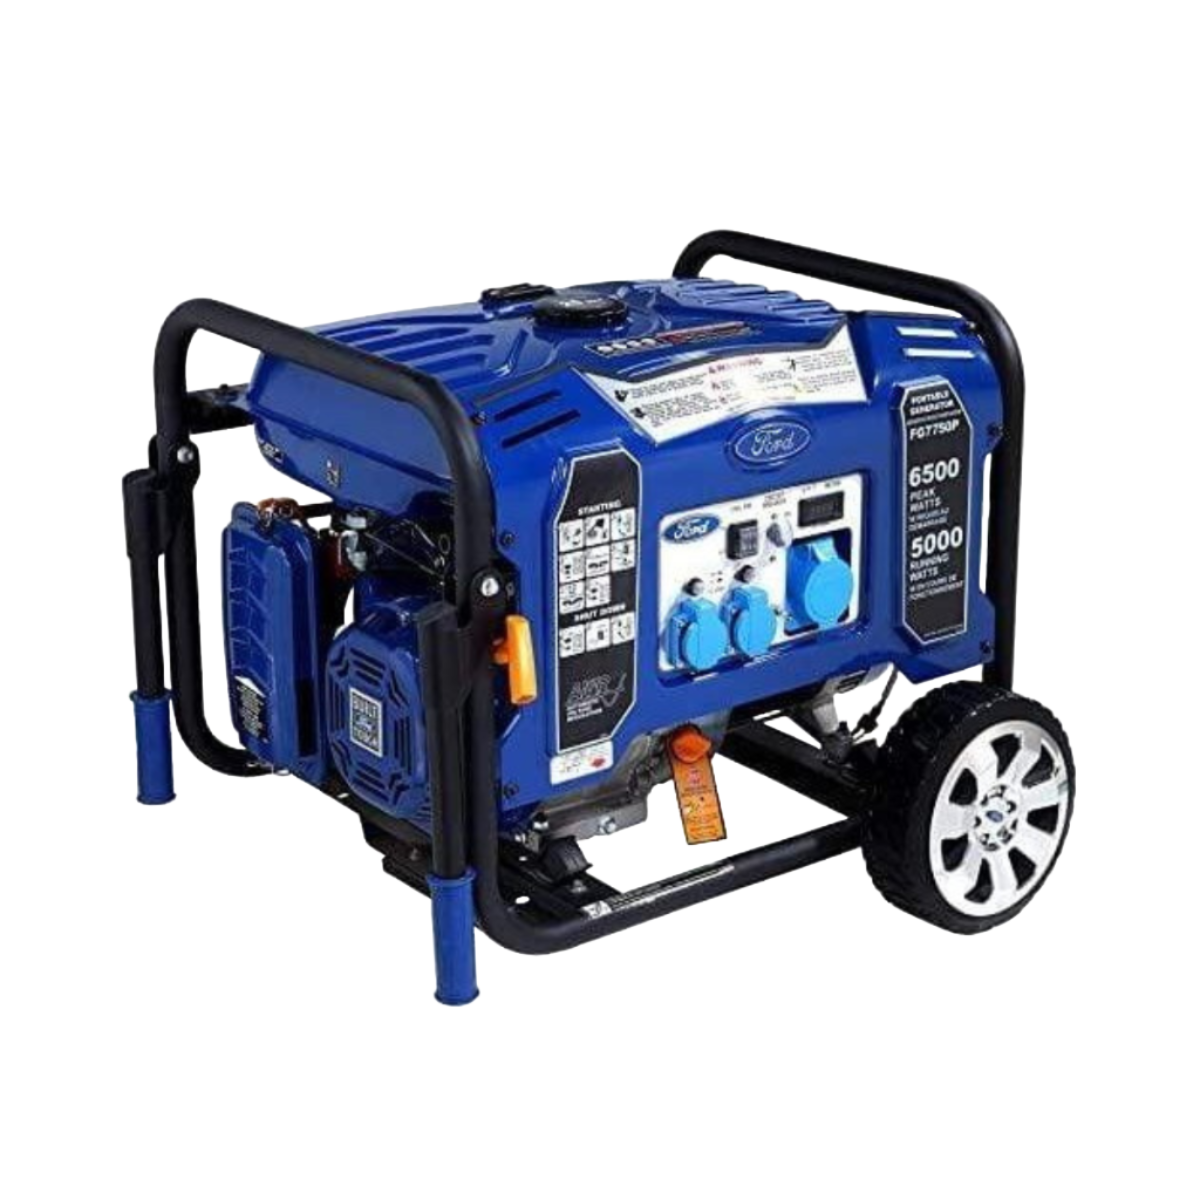 Ford Portable Gasoline Generator 6500W Peak 5000W with Electric Start - FG7750P supply-master